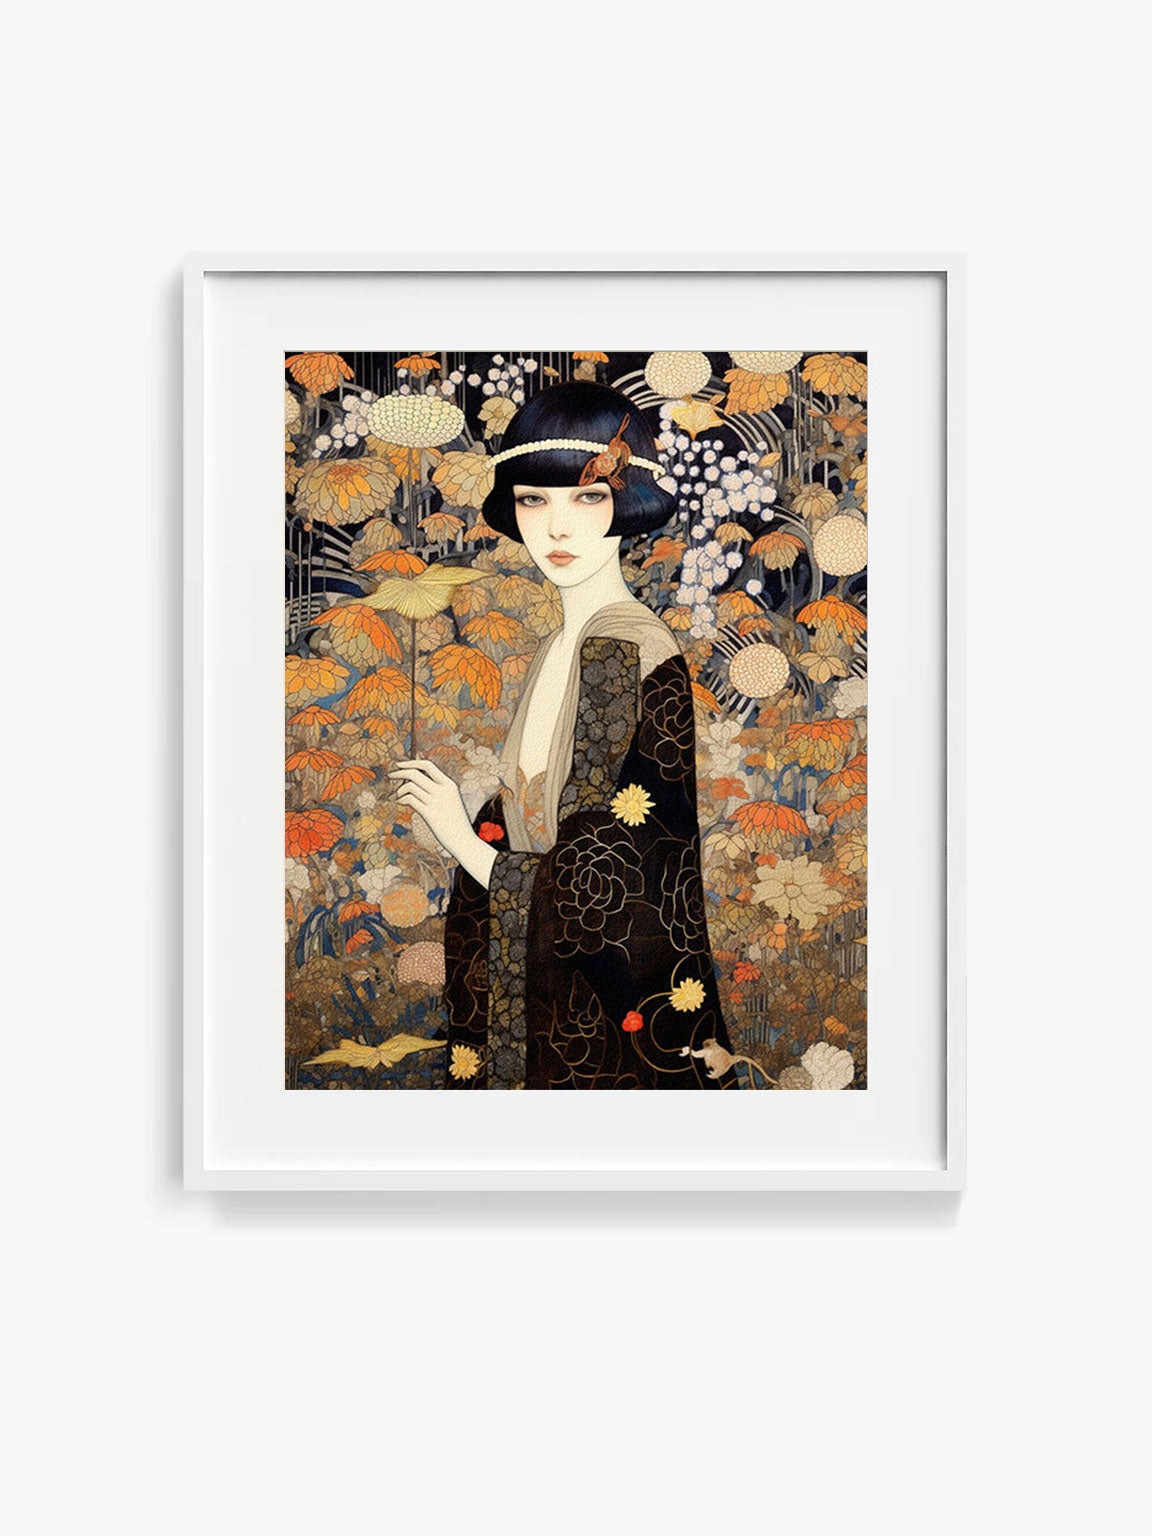 original art print, Vintage Retro Art Style Poster: Woman with Flowers in Orange Tones - Inspired by Art Deco, Fashion, and Classic Movies, Retro Glam Fashion Portrait, Modern Art Deco Print, Eclectic Punk Boho Decor, Vintage Flowers Wall Art, Interior Design, Moody Graphic Art, Retro Glam Fashion Portrait, Modern Art Deco Print, Eclectic Punk Boho Decor, Vintage Flowers Wall Art, Interior Design, Moody Graphic Art, Bathroom Art, Living Room Wall Decor, Art for your Walls, mythology art, history, tribal